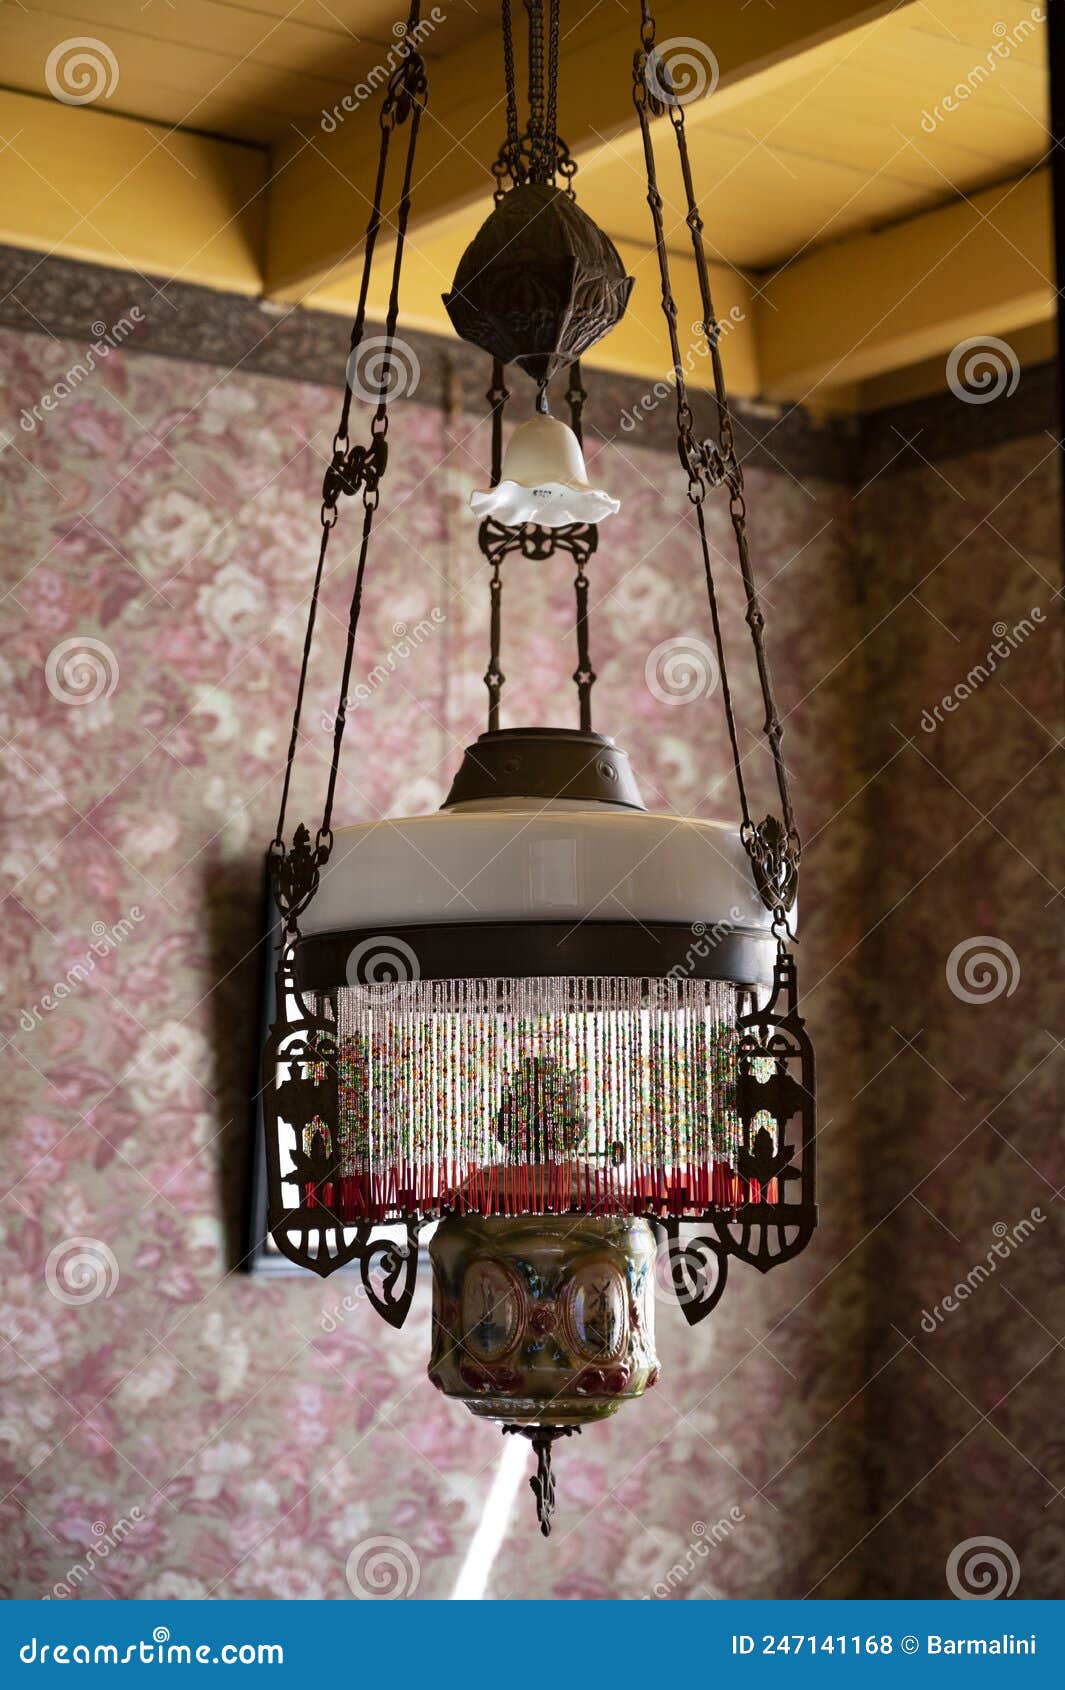 Old Fashioned Dutch Interior, Ceilling Lamp and Room Decoration in ...